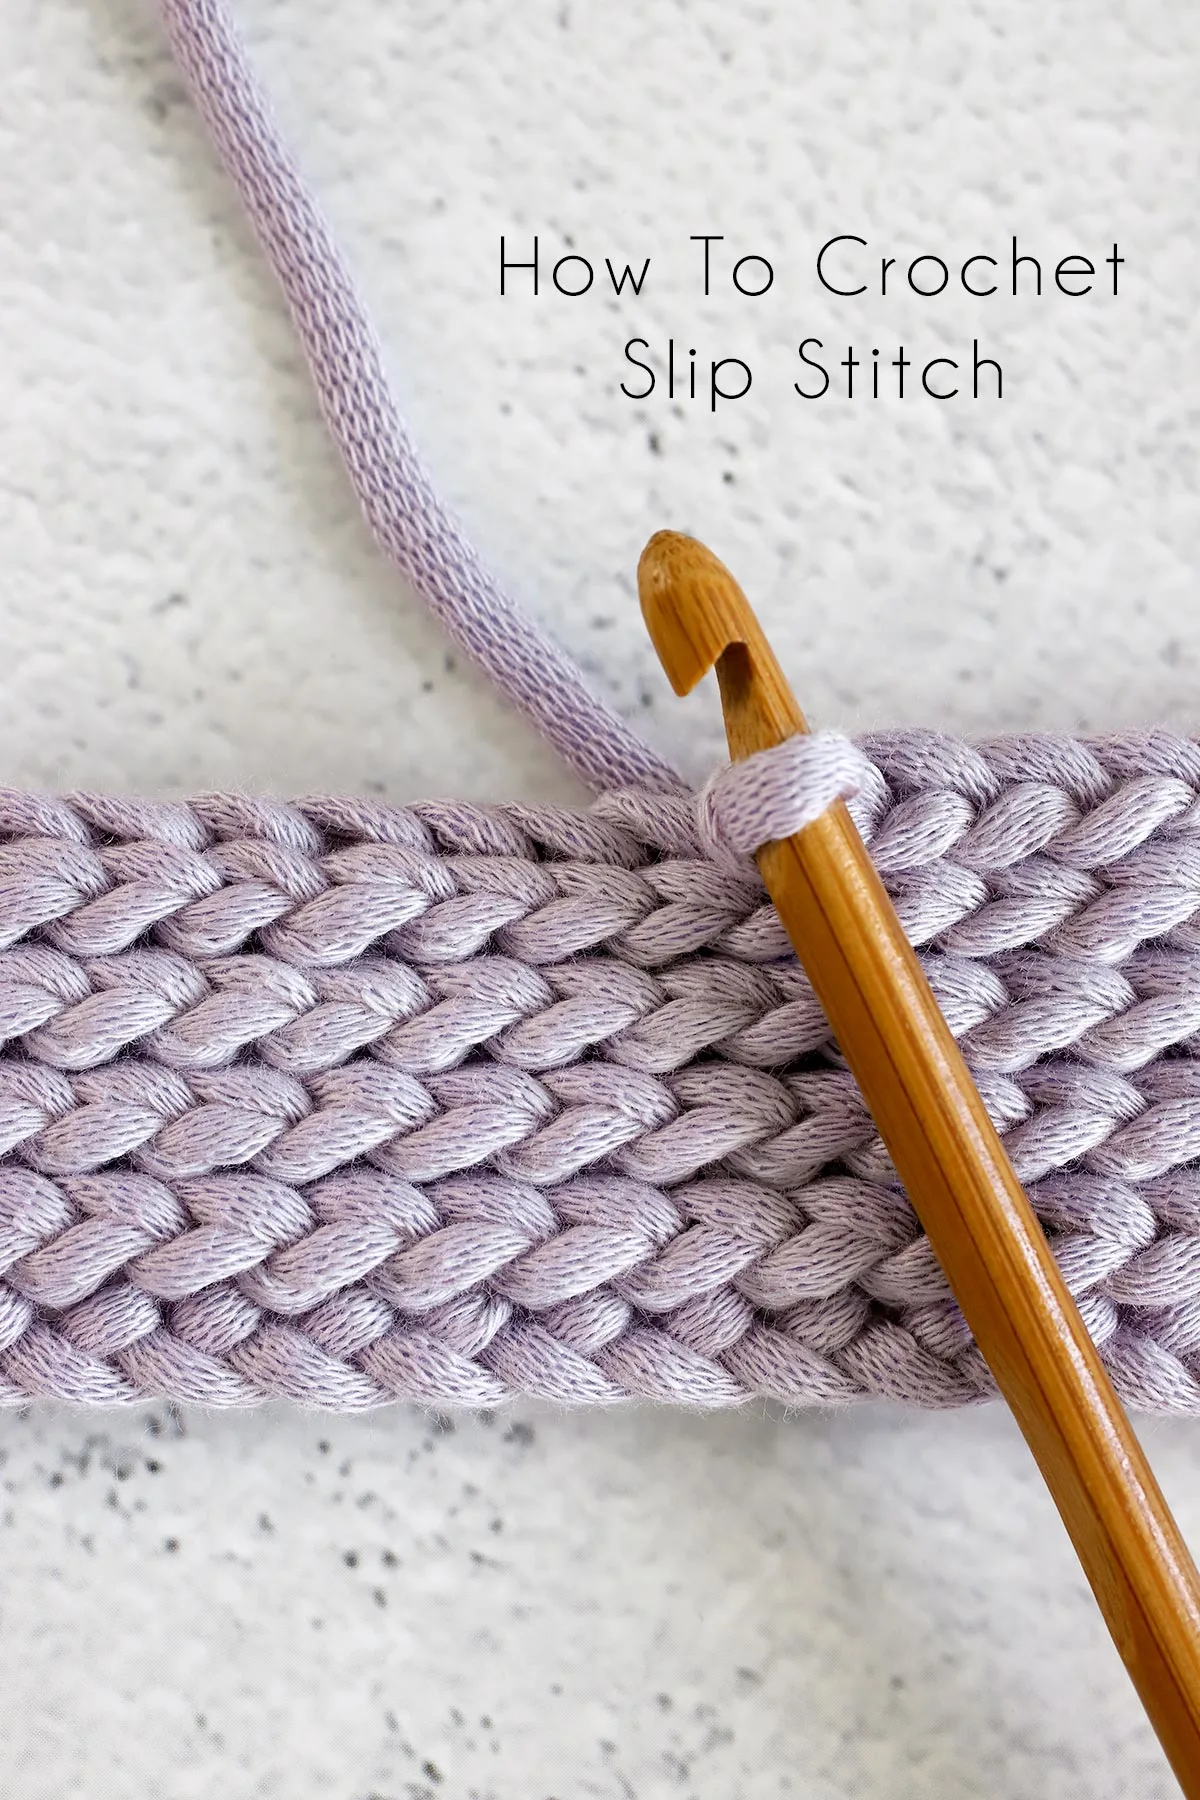 How To Crochet Slip Stitch: An Easy Guide For Beginners